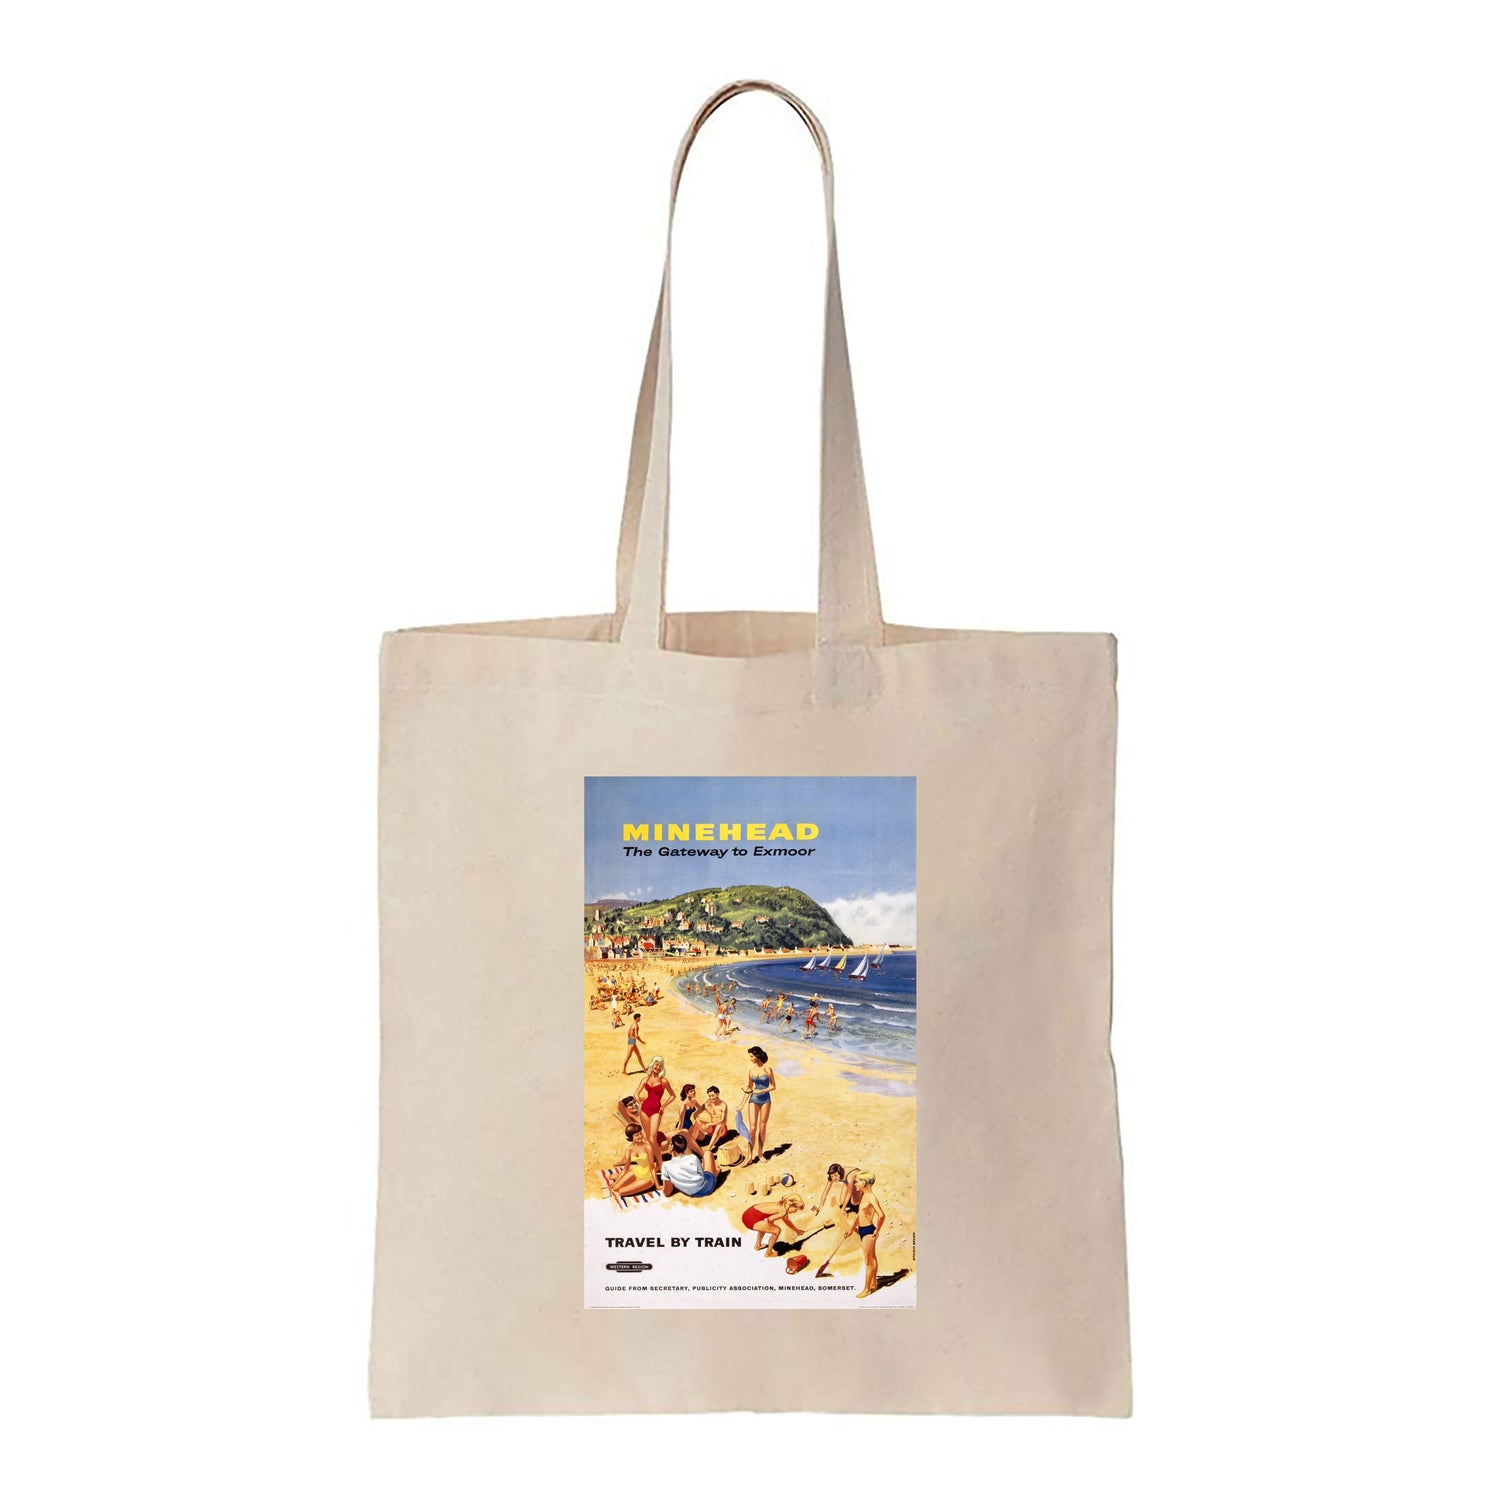 Minehead, The Gateway to Exmoor, Travel By Train - Canvas Tote Bag